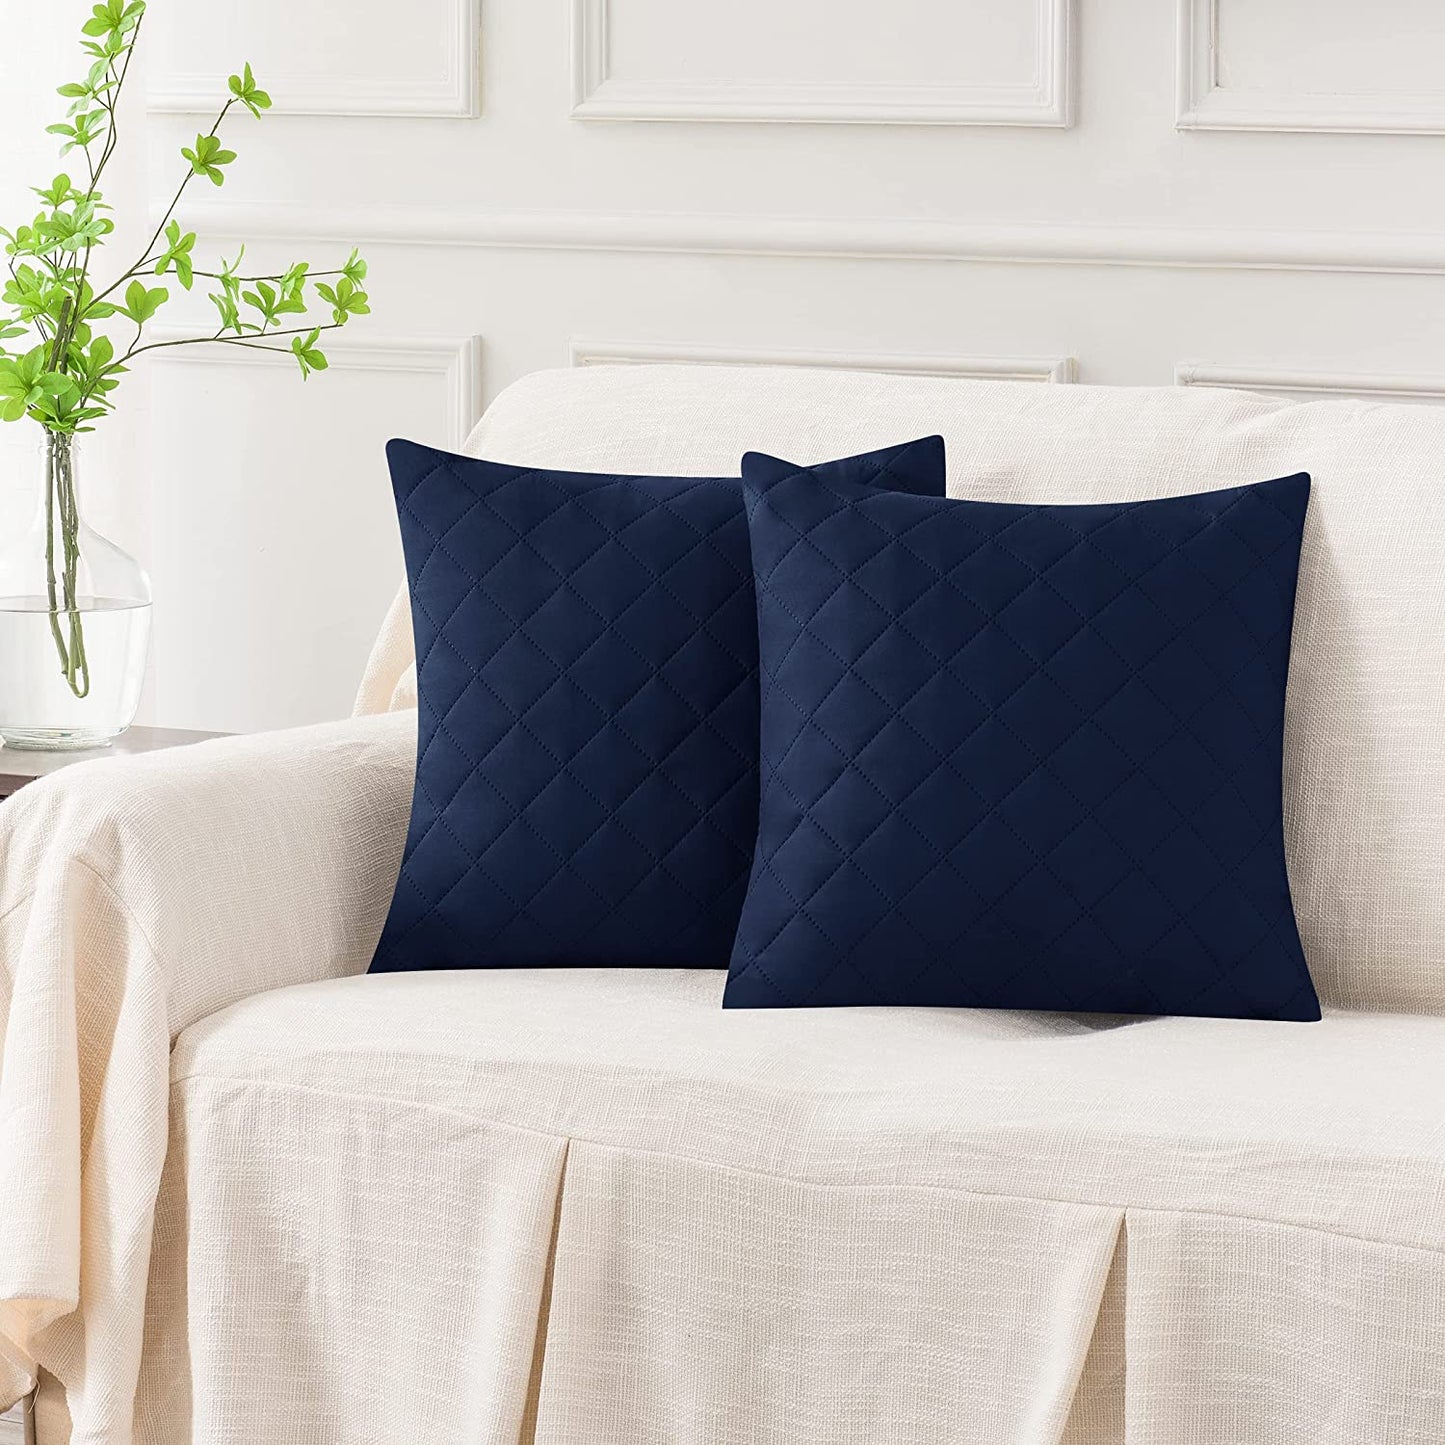 Quilted Cushion Cover Square Pattren 16"x16"Navy Blue